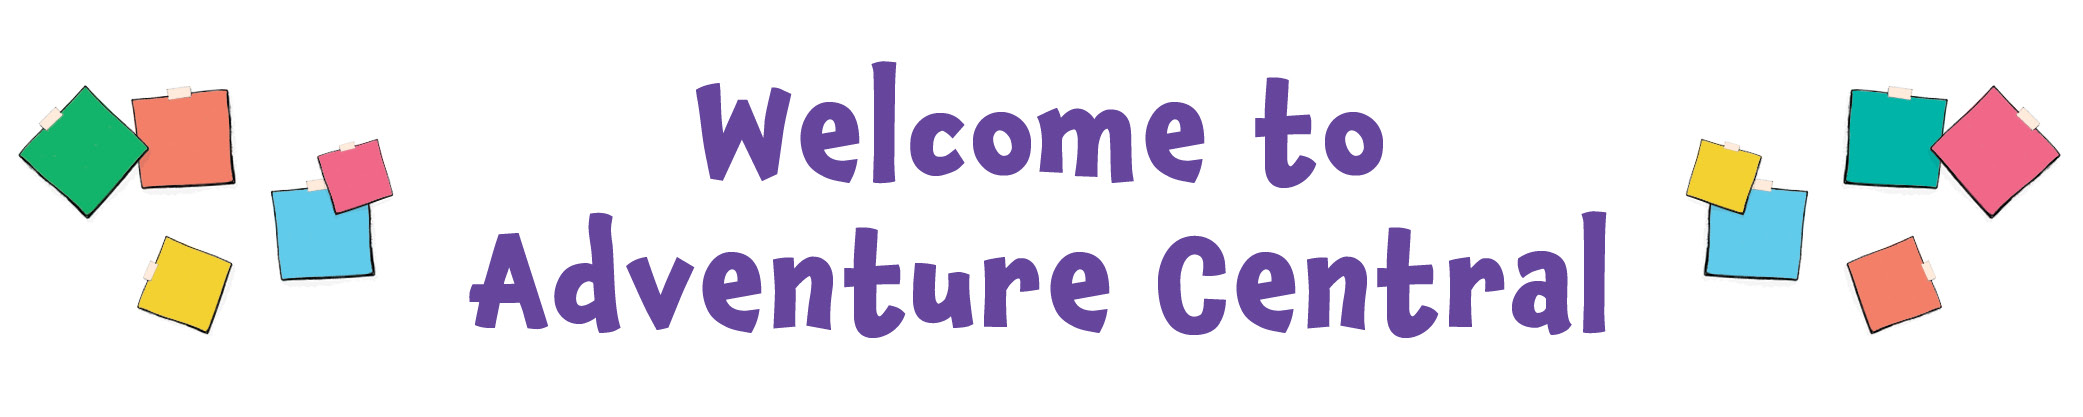 Welcome to Adventure Central